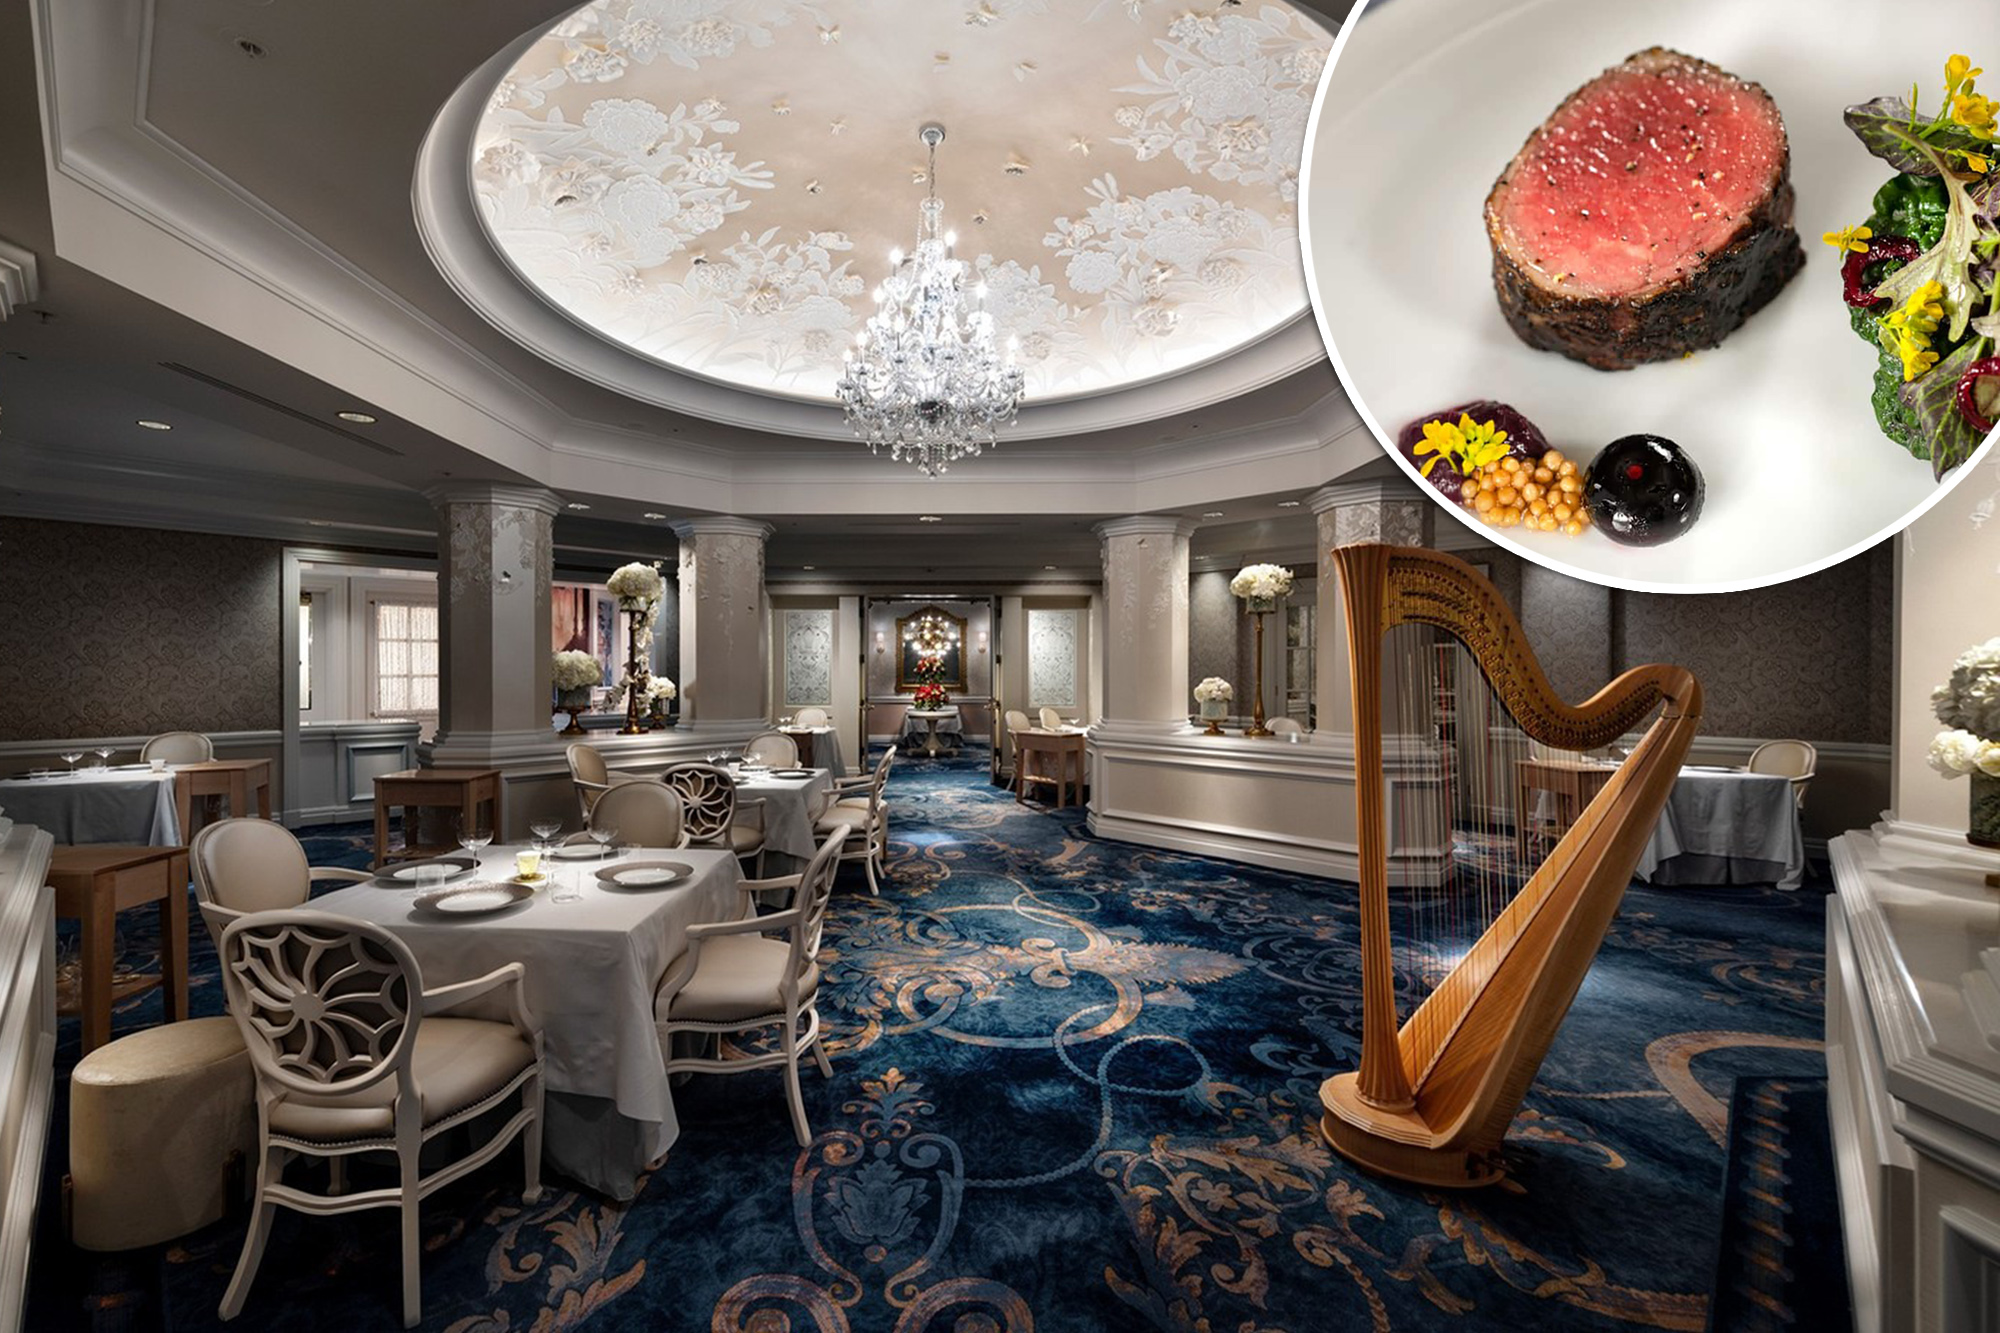 Victoria & Albert's at Disney's Grand Floridian Resort & Spa is the first theme-park eatery to earn a Michelin star.